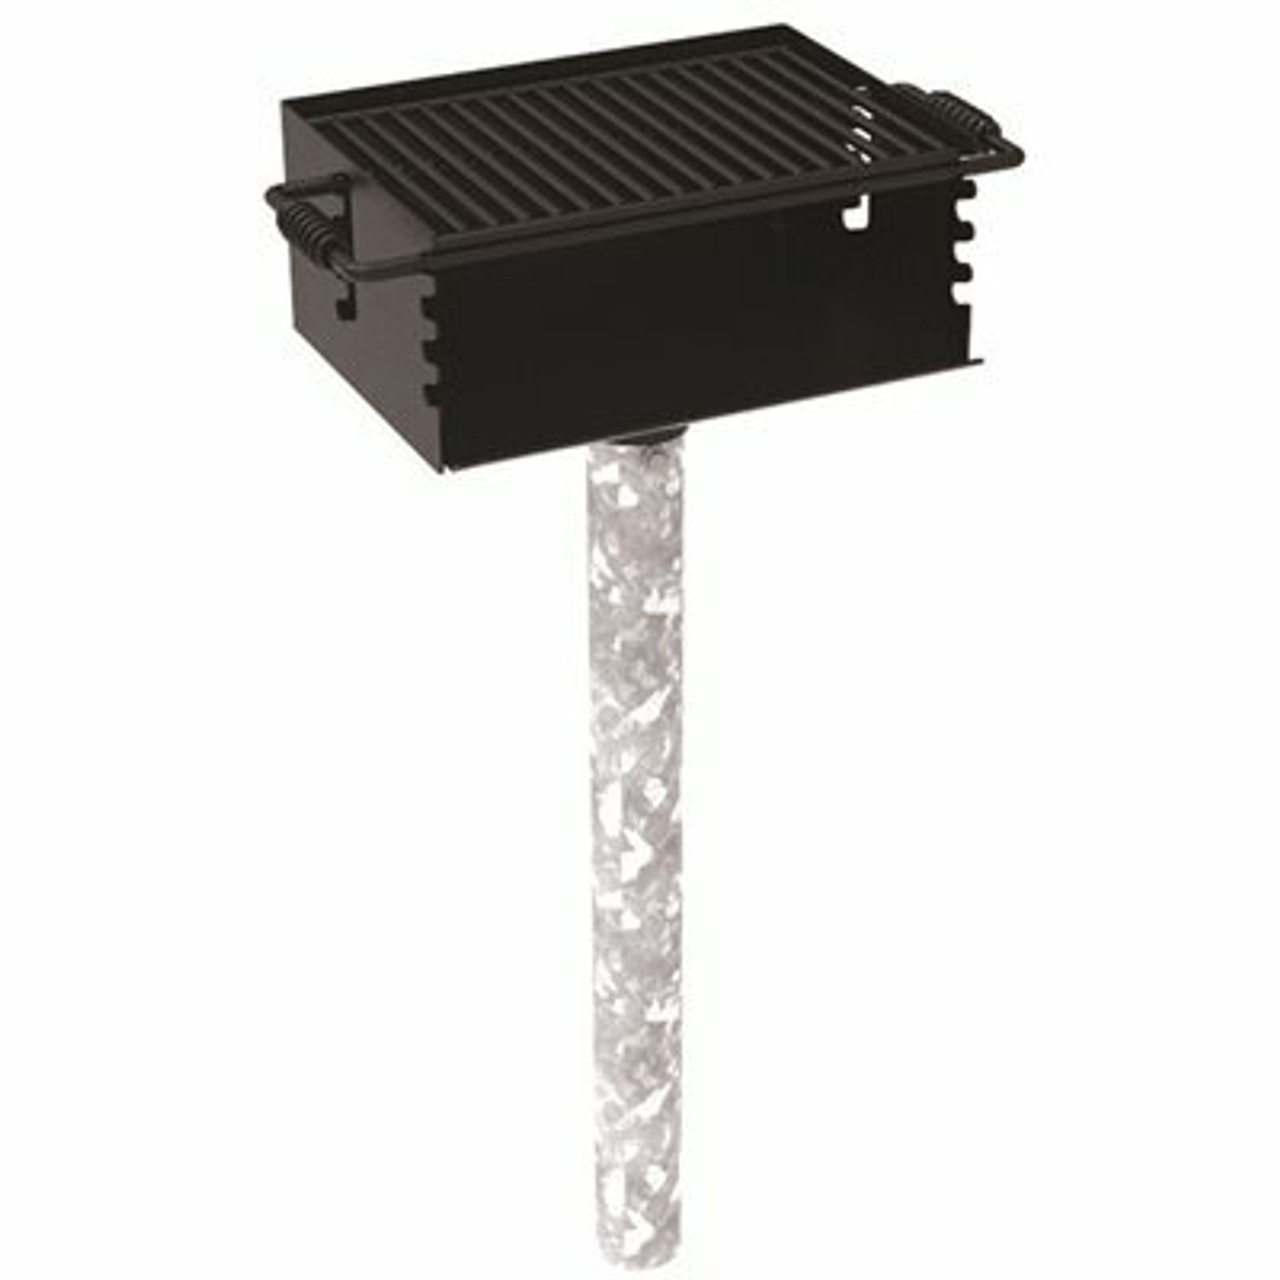 280 Sq. In. Rotating Flip-Back Commercial Pedestal Grill With In-Ground Mount Post In Black